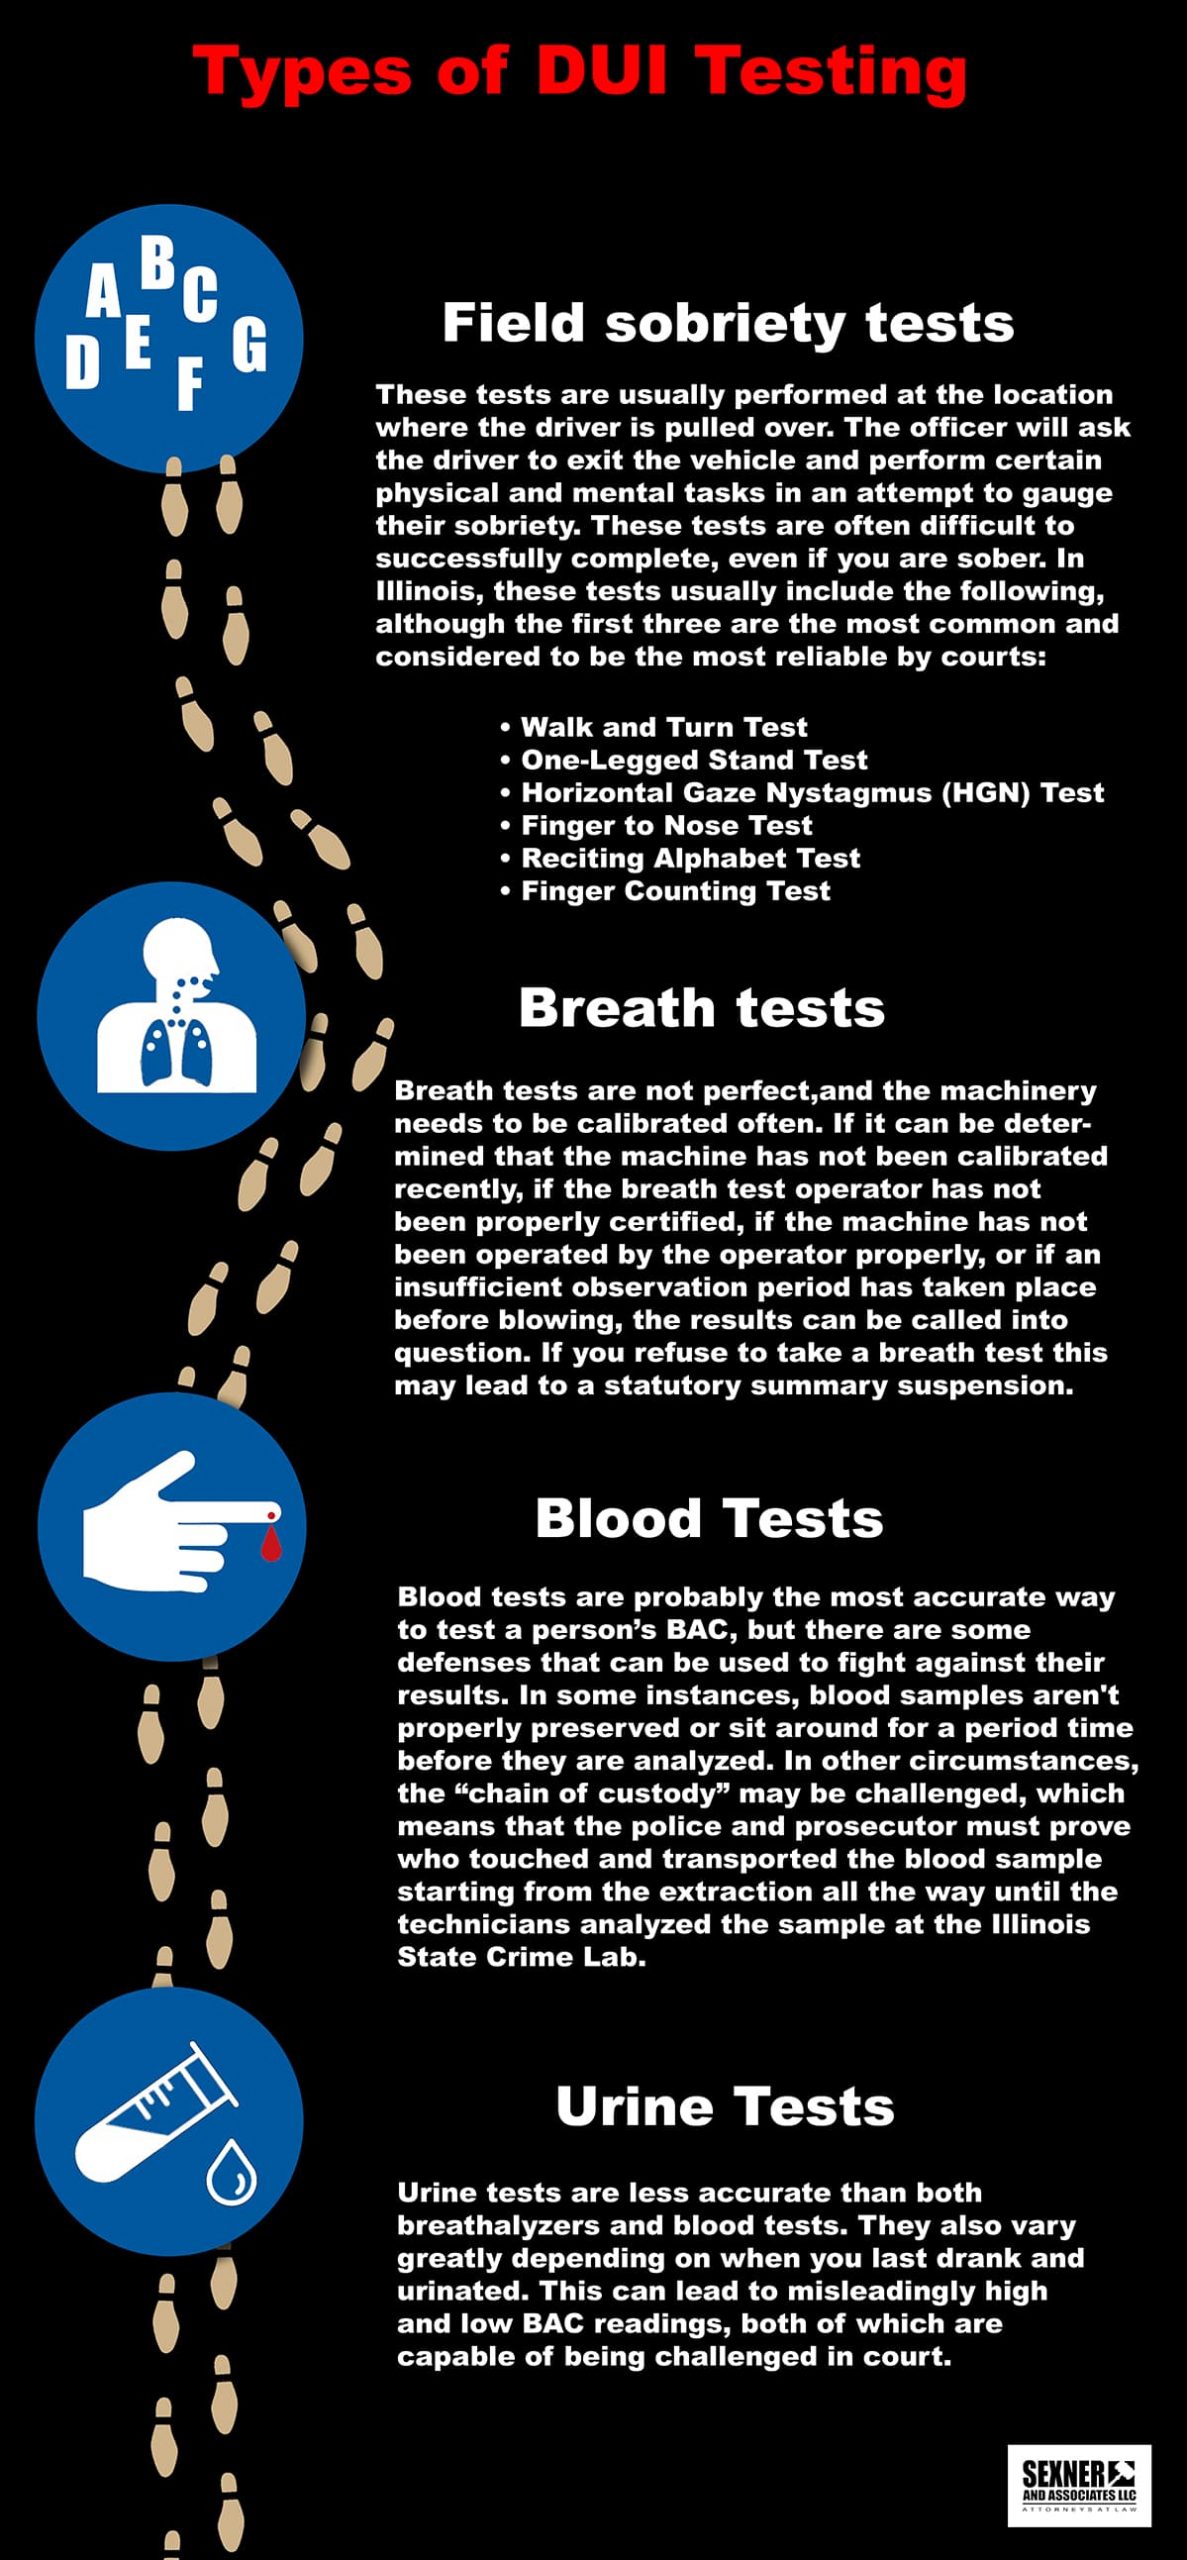 Types of DUI testing infographic